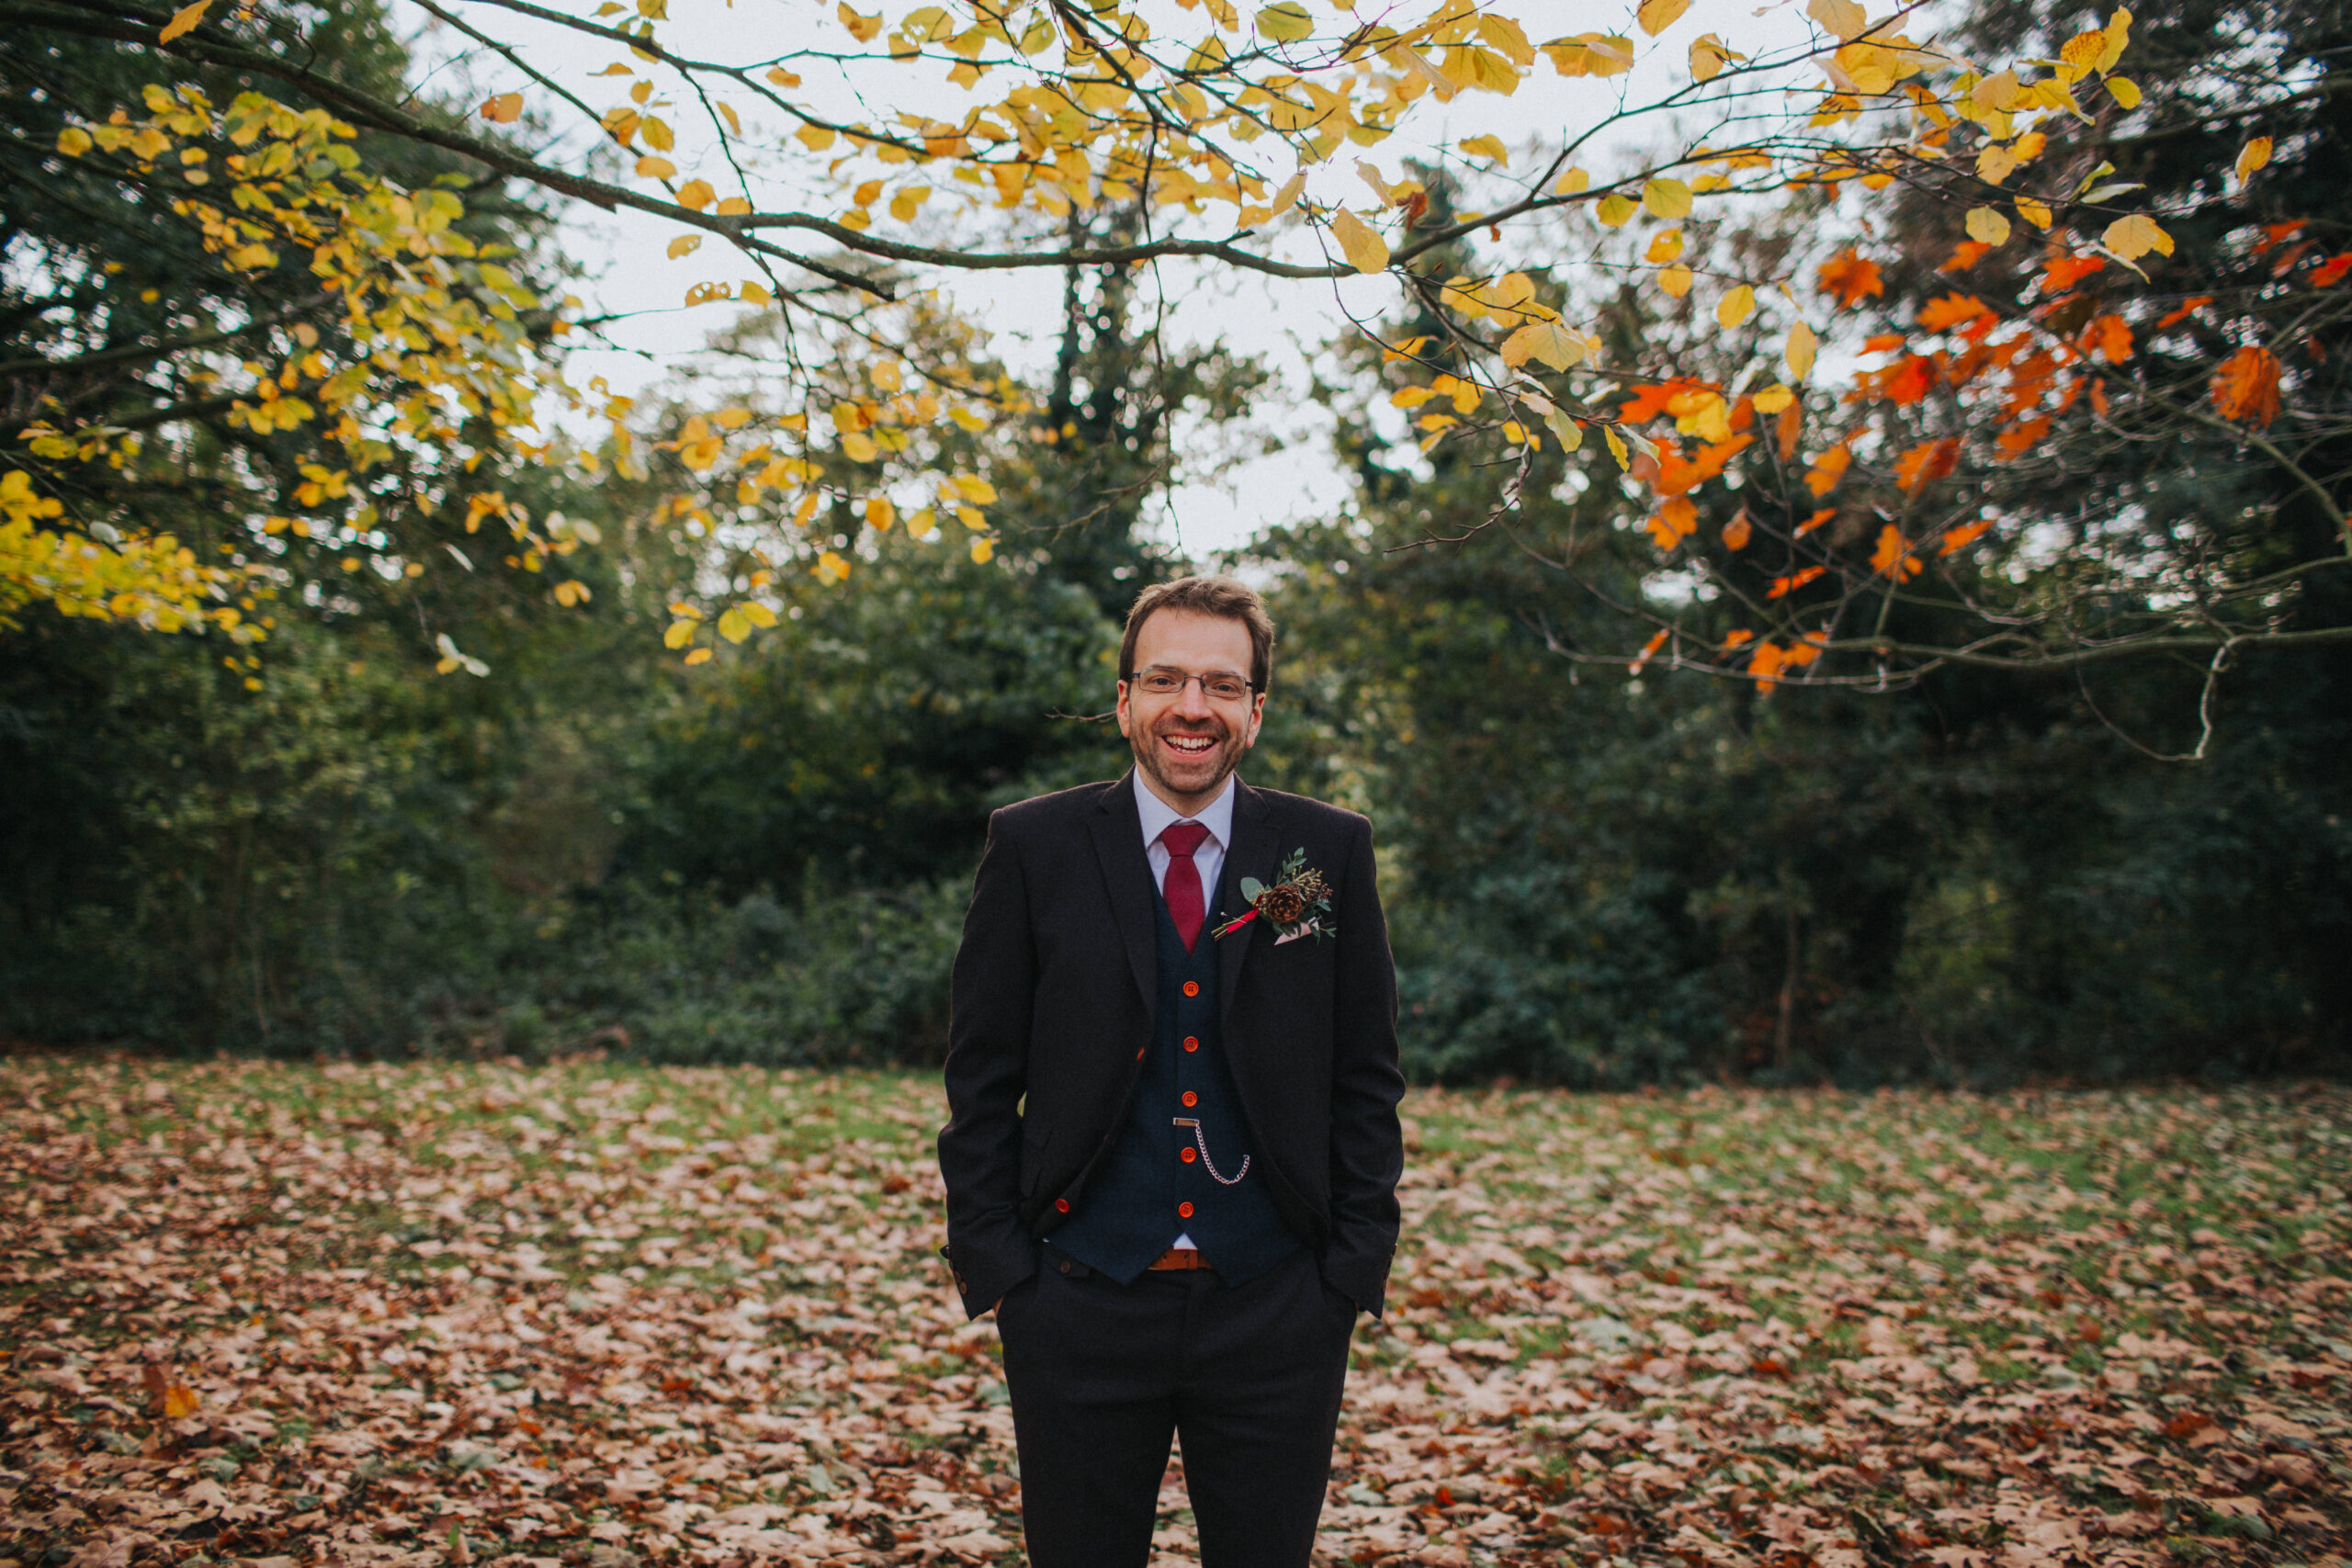 Autumnal love captured in candid shots at Shropshire venue